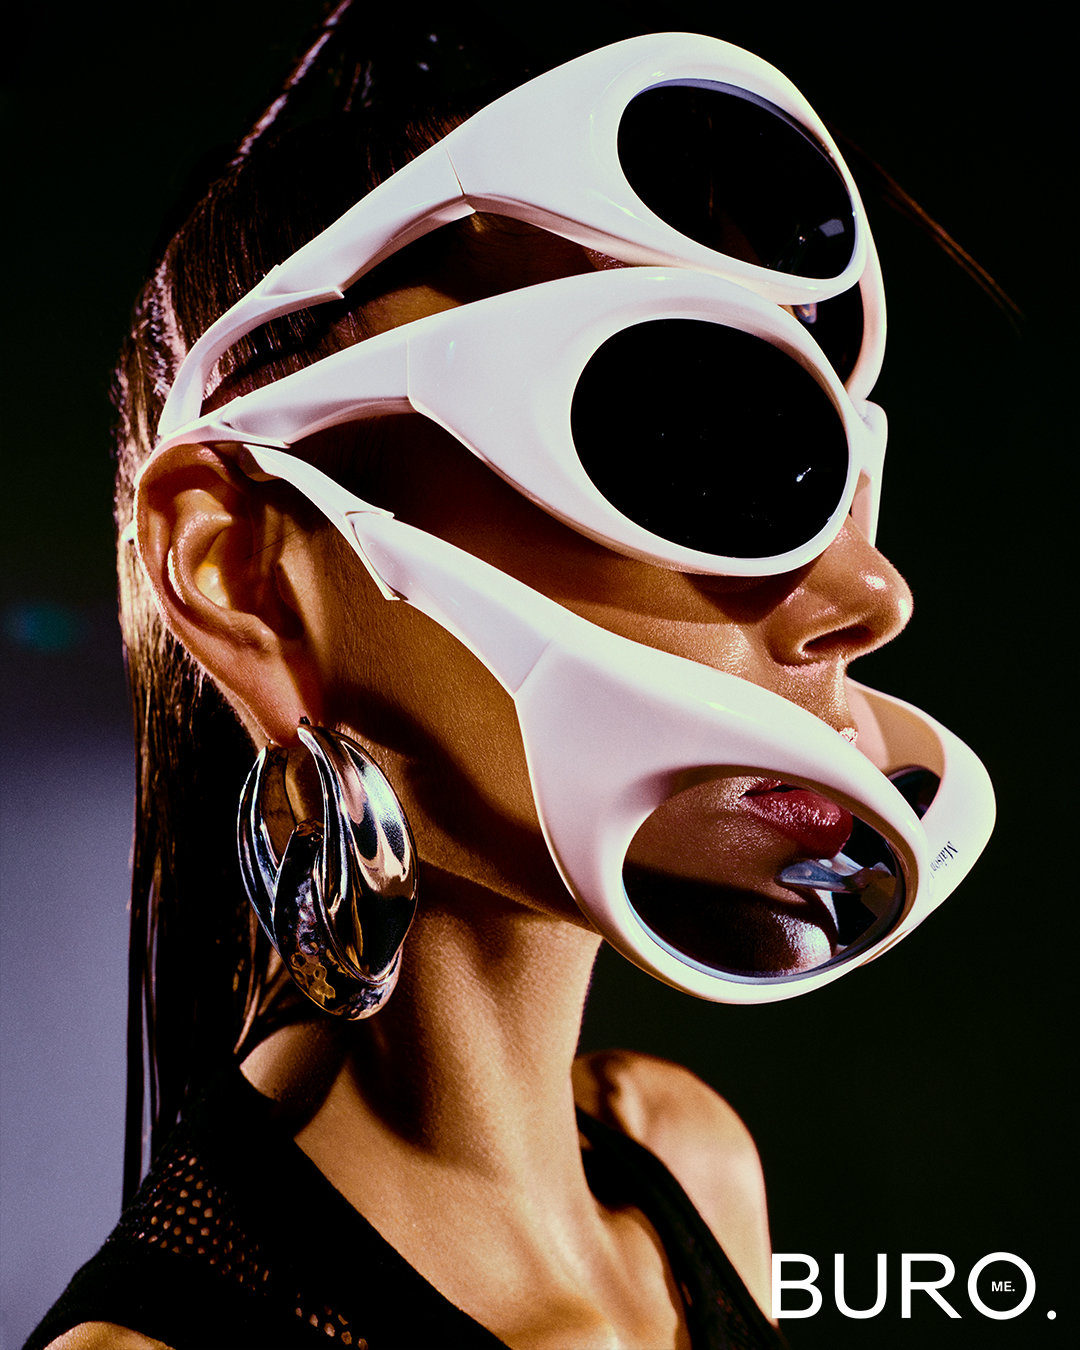 THE FUTURE IS RETRO: FROM 60'S SPACE AGE TO 90'S CYBER PUNK IN BURO'S  LATEST EDITORIAL STORY. - Buro 24/7